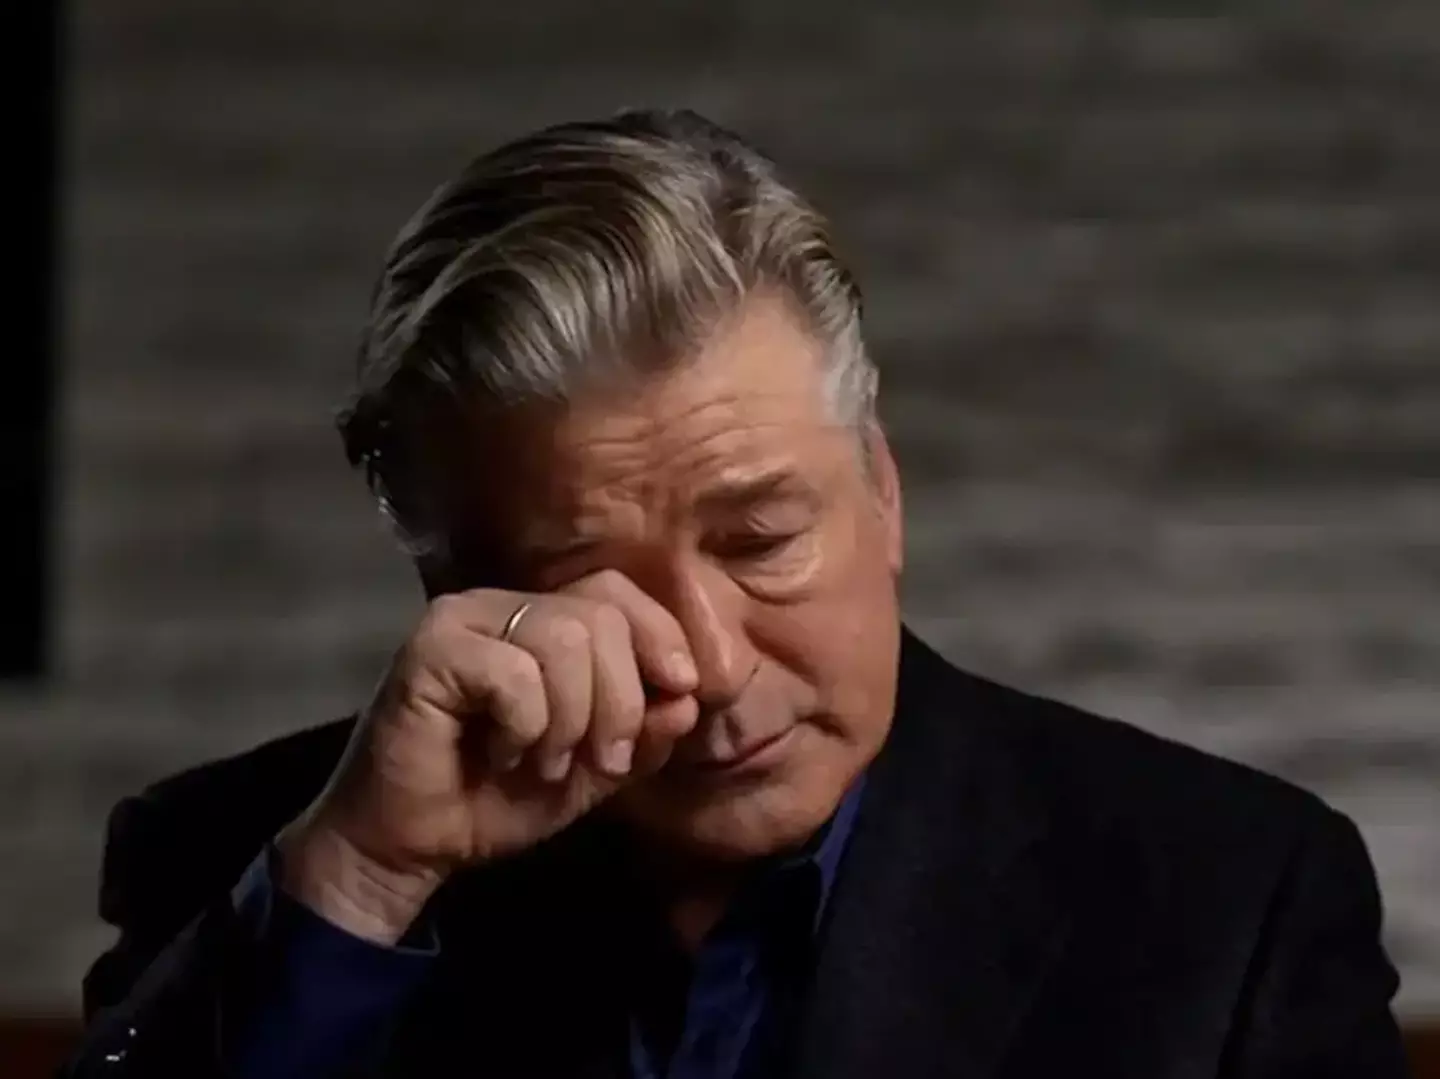 Alec Baldwin has maintained that he didn't pull the trigger in interviews.